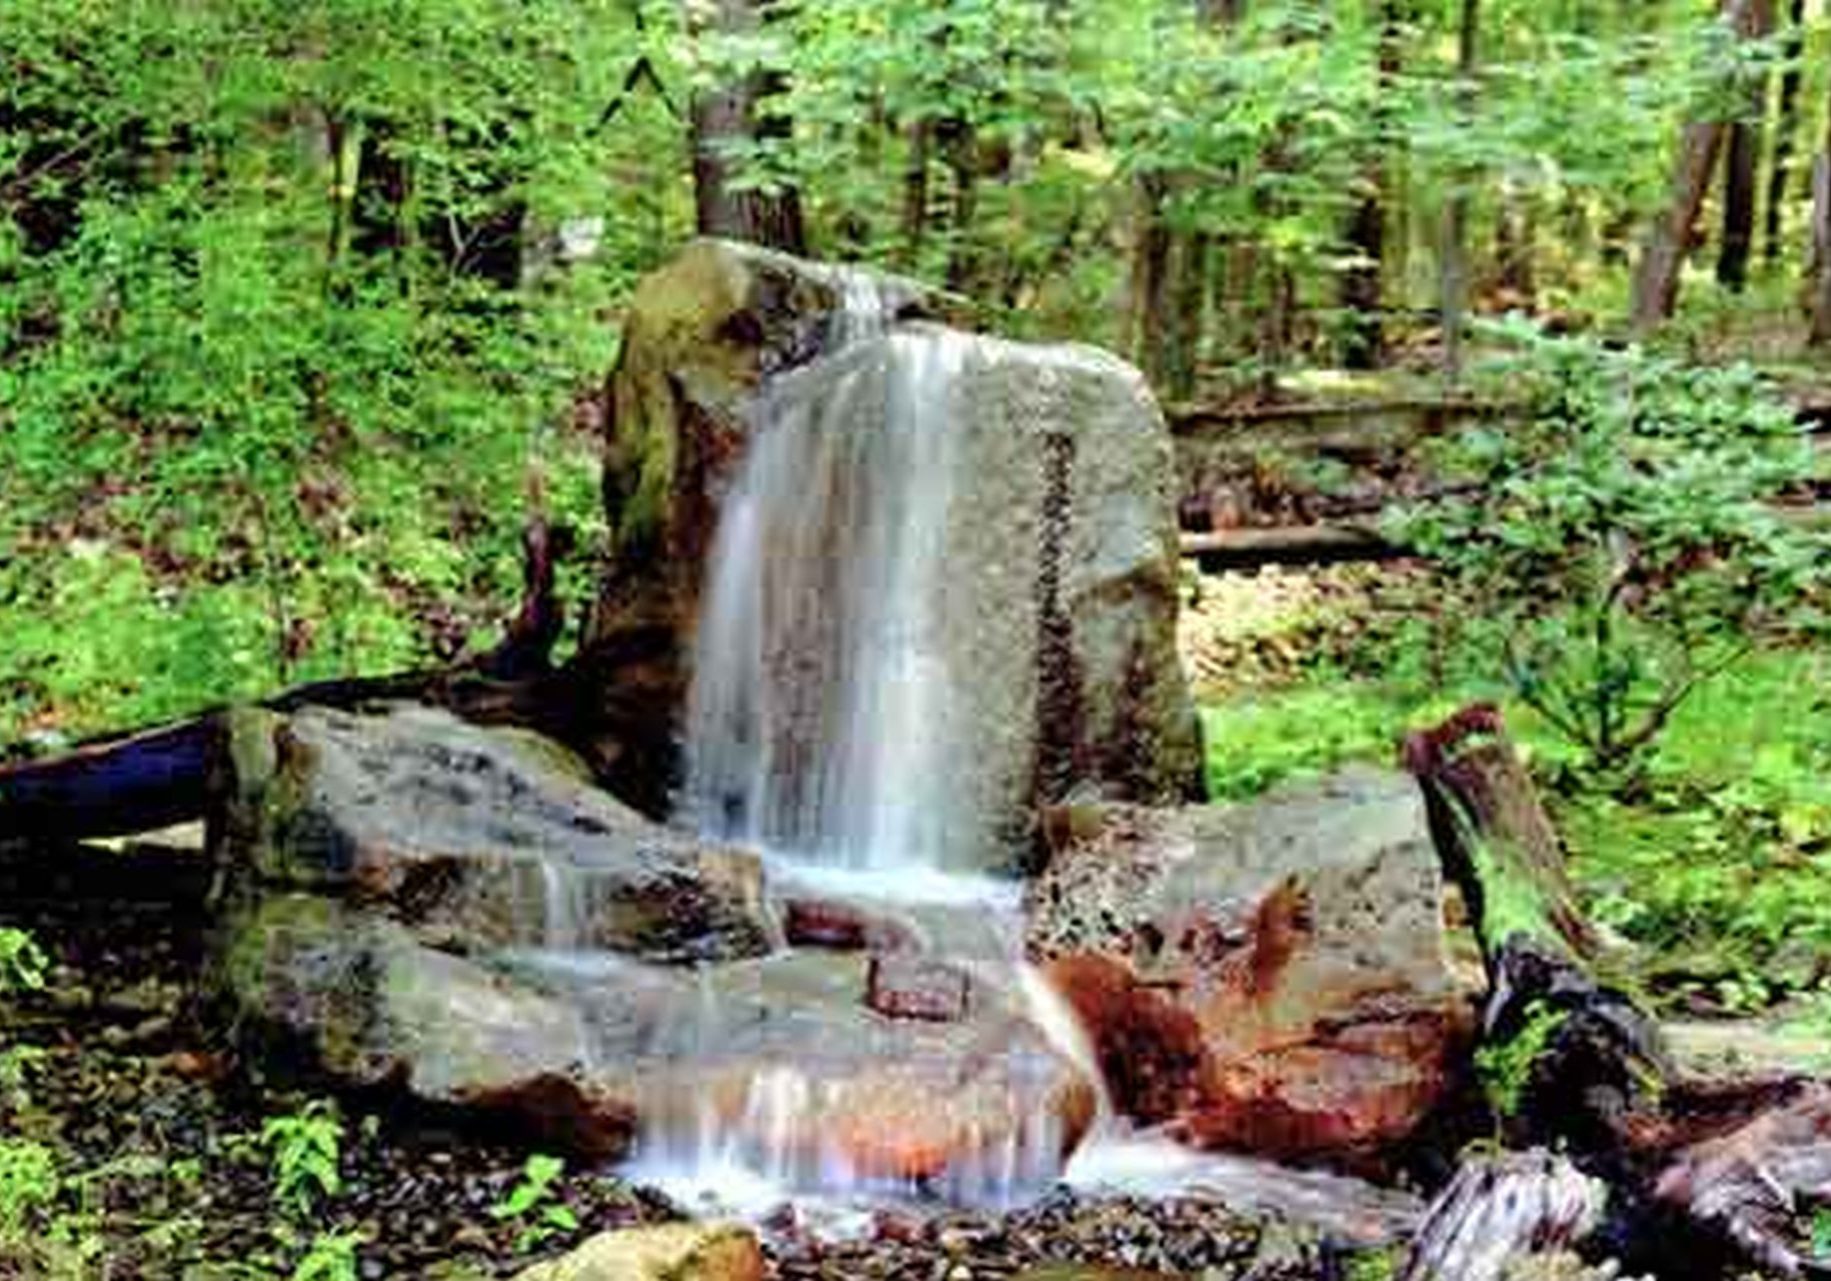 A small waterfall in the middle of a wooded area.